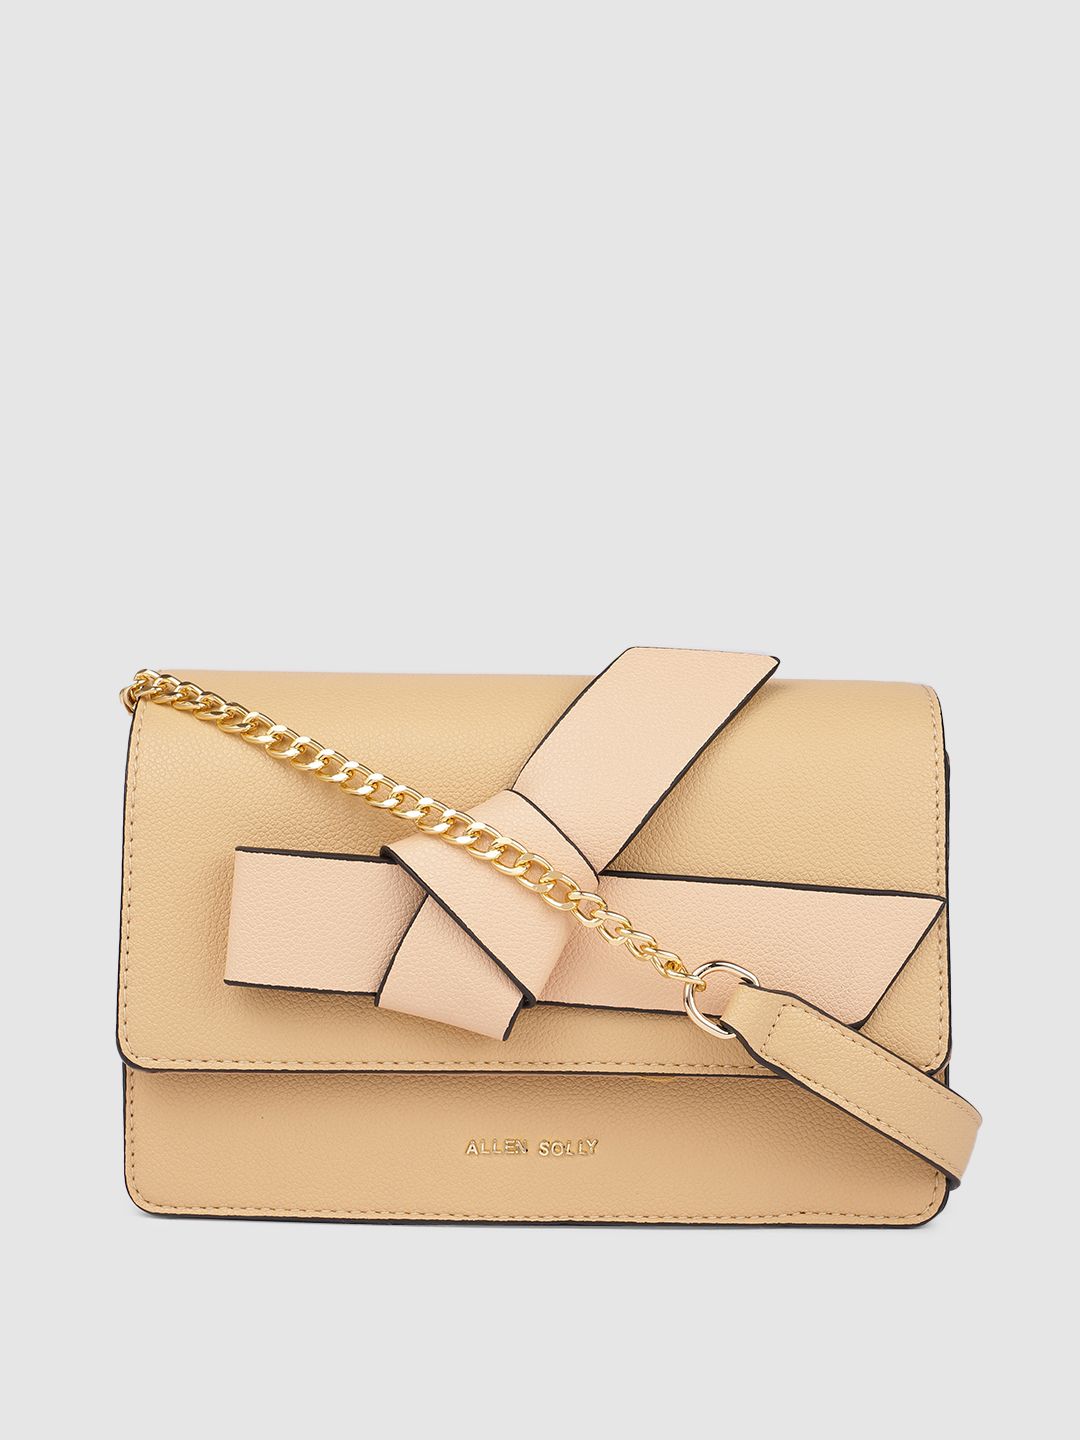 Allen Solly Nude-Coloured Solid Sling Bag Price in India